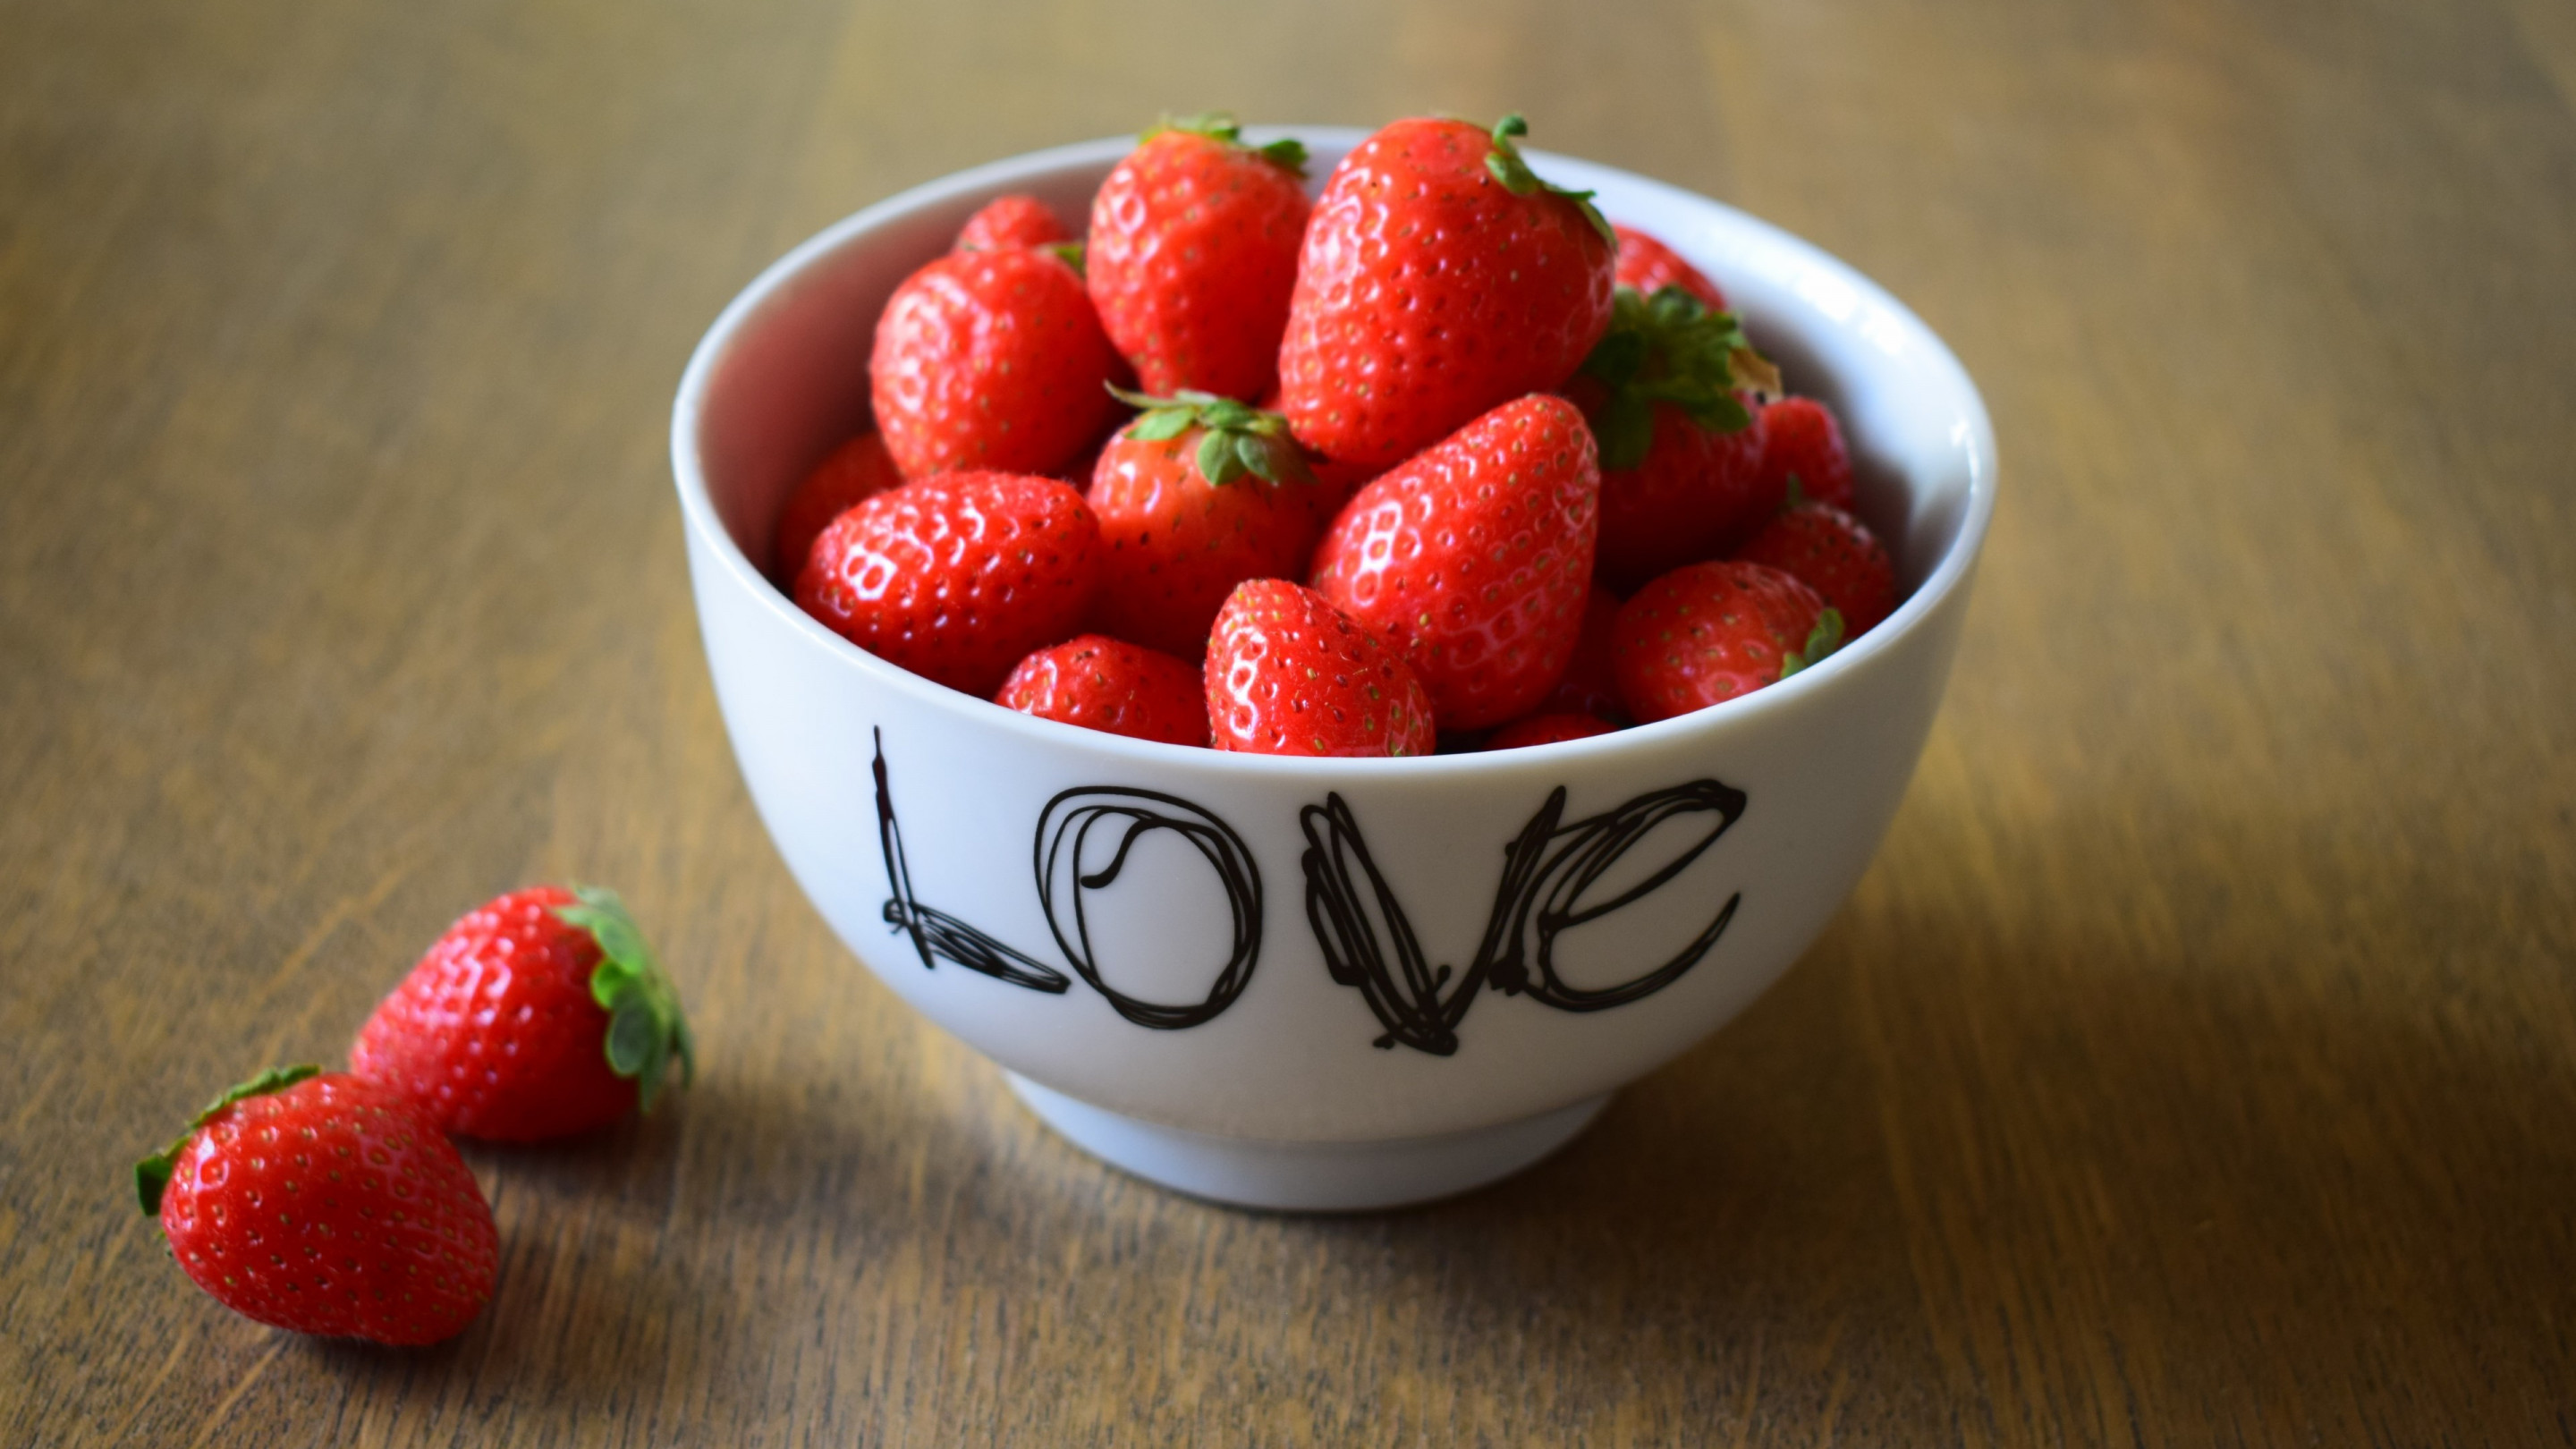 Strawberries with love wallpaper 2880x1620